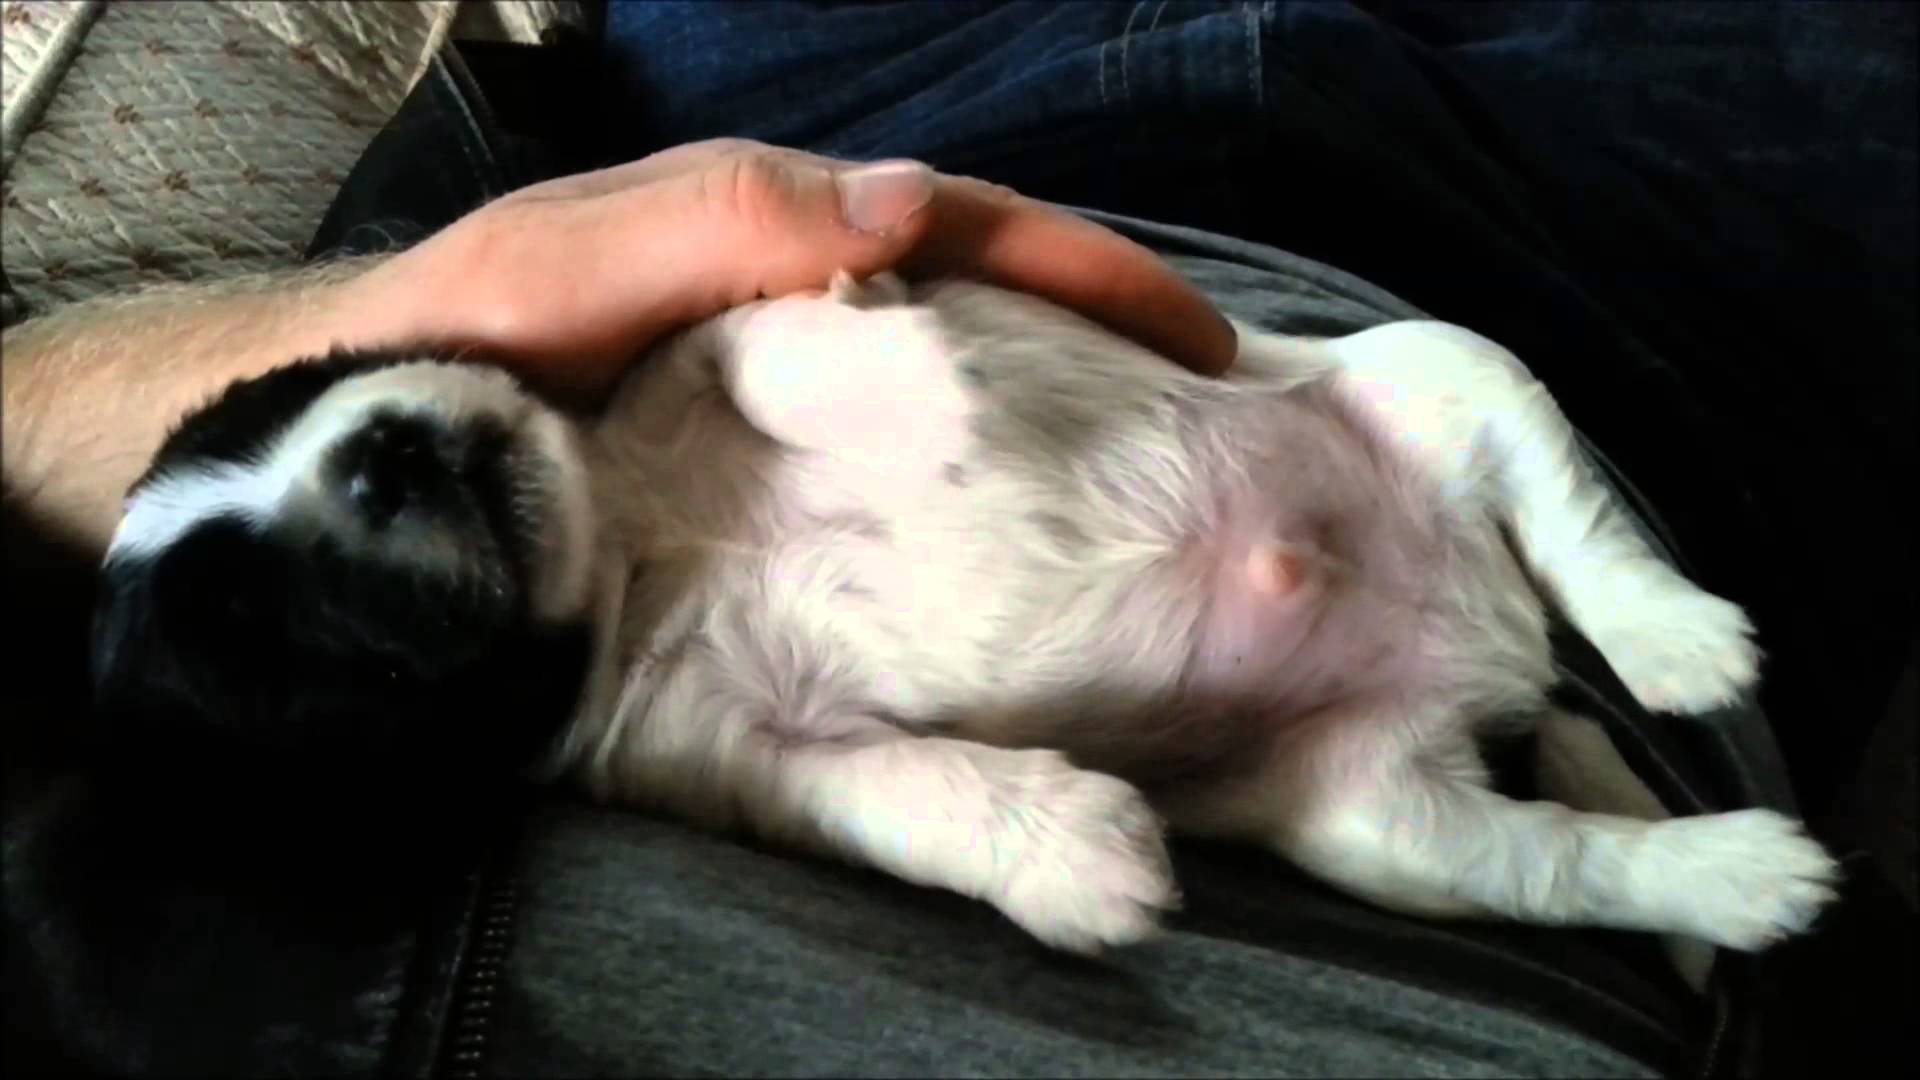 SLEEPING PUPPY Dreaming and Twitching - YouTube